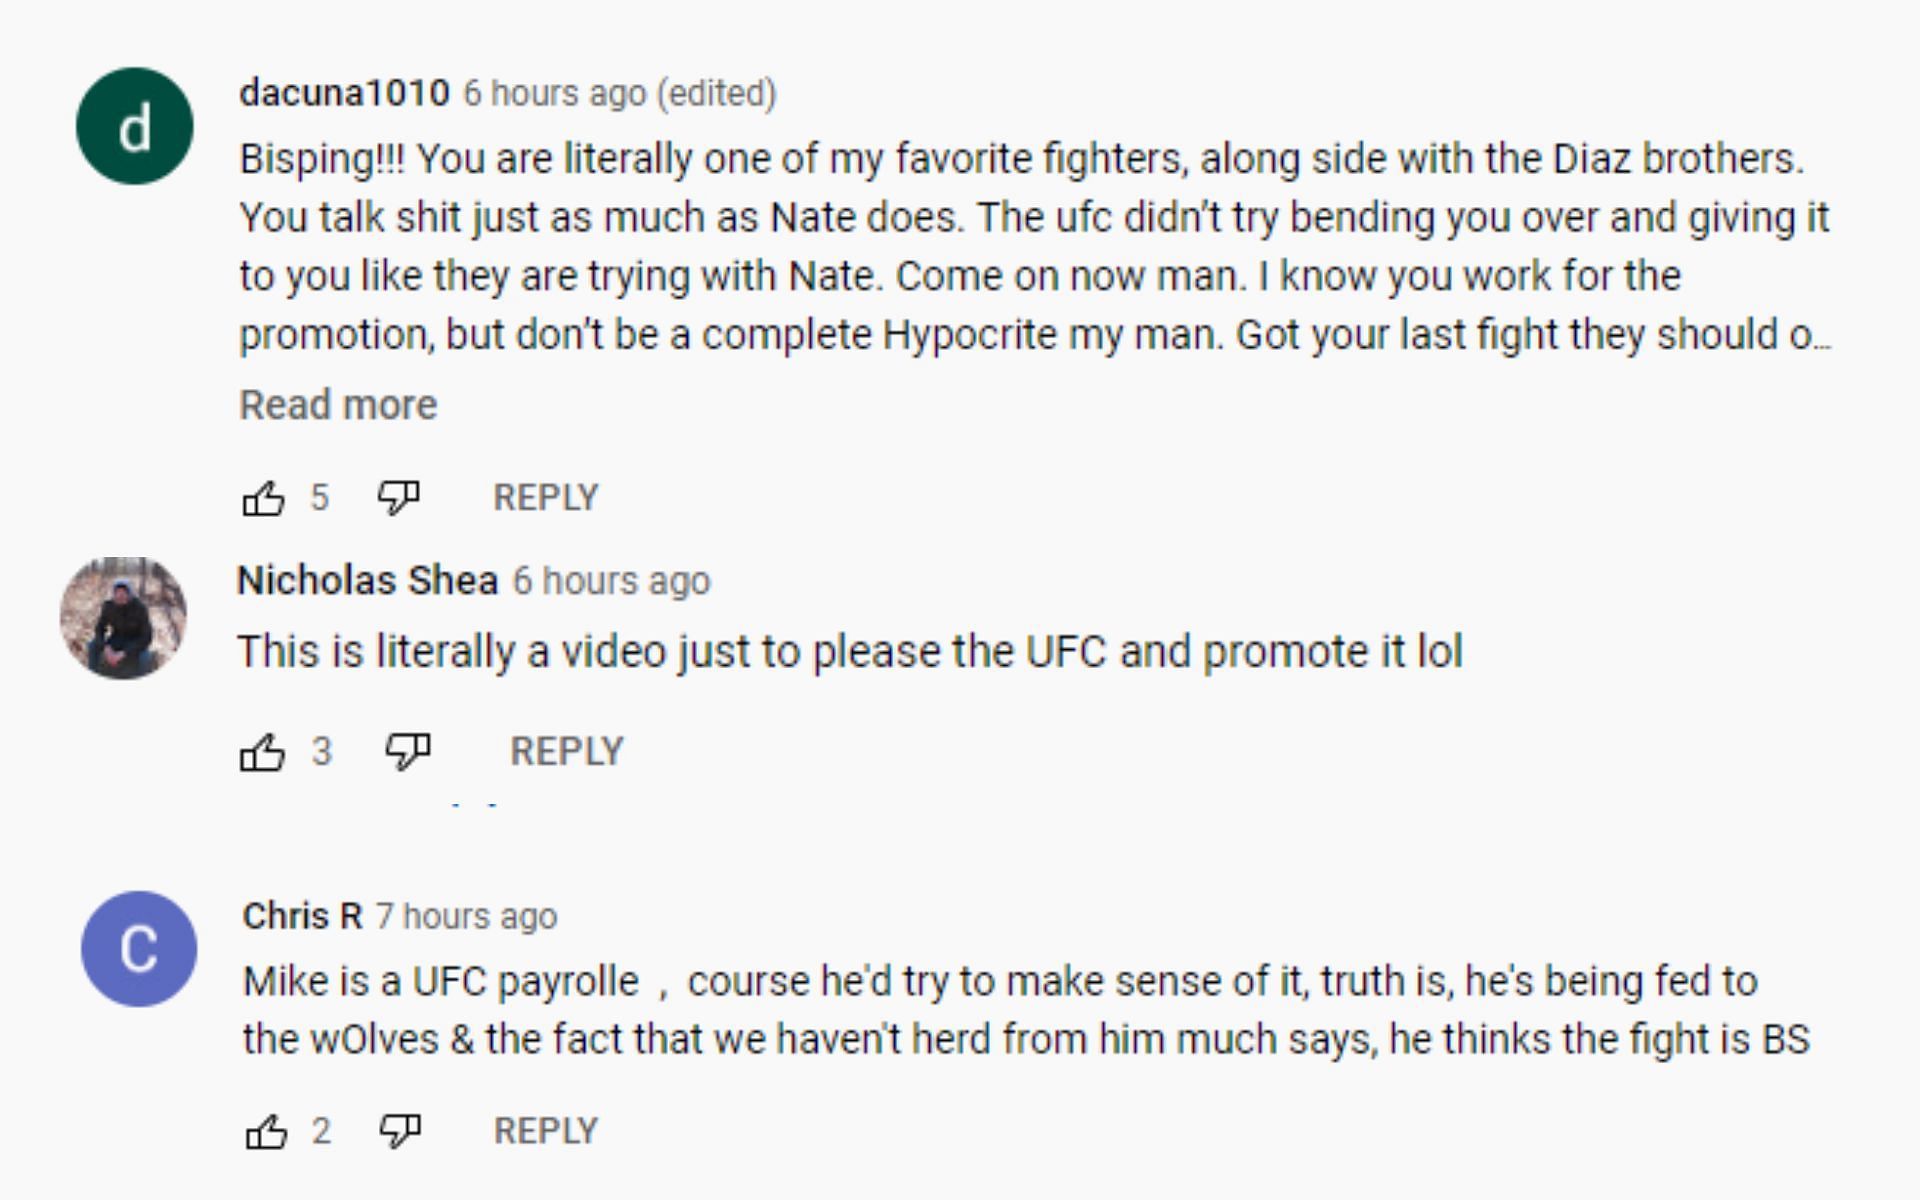 via @Michael Bisping on YouTube